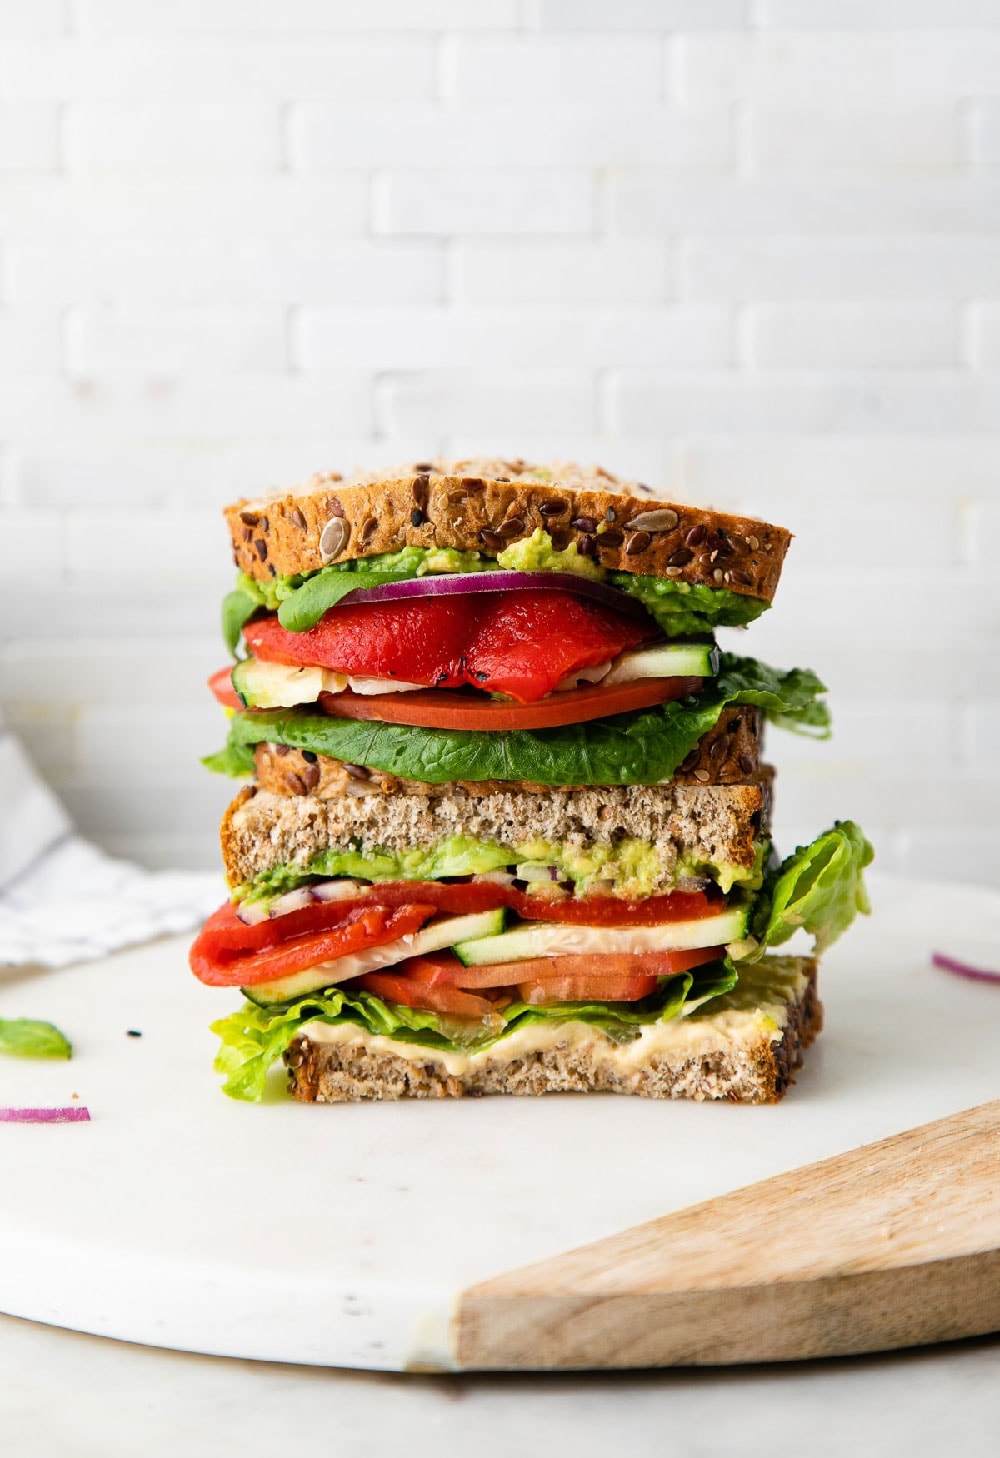 25 Best Vegan Sandwich Recipes Perfect For Lunch